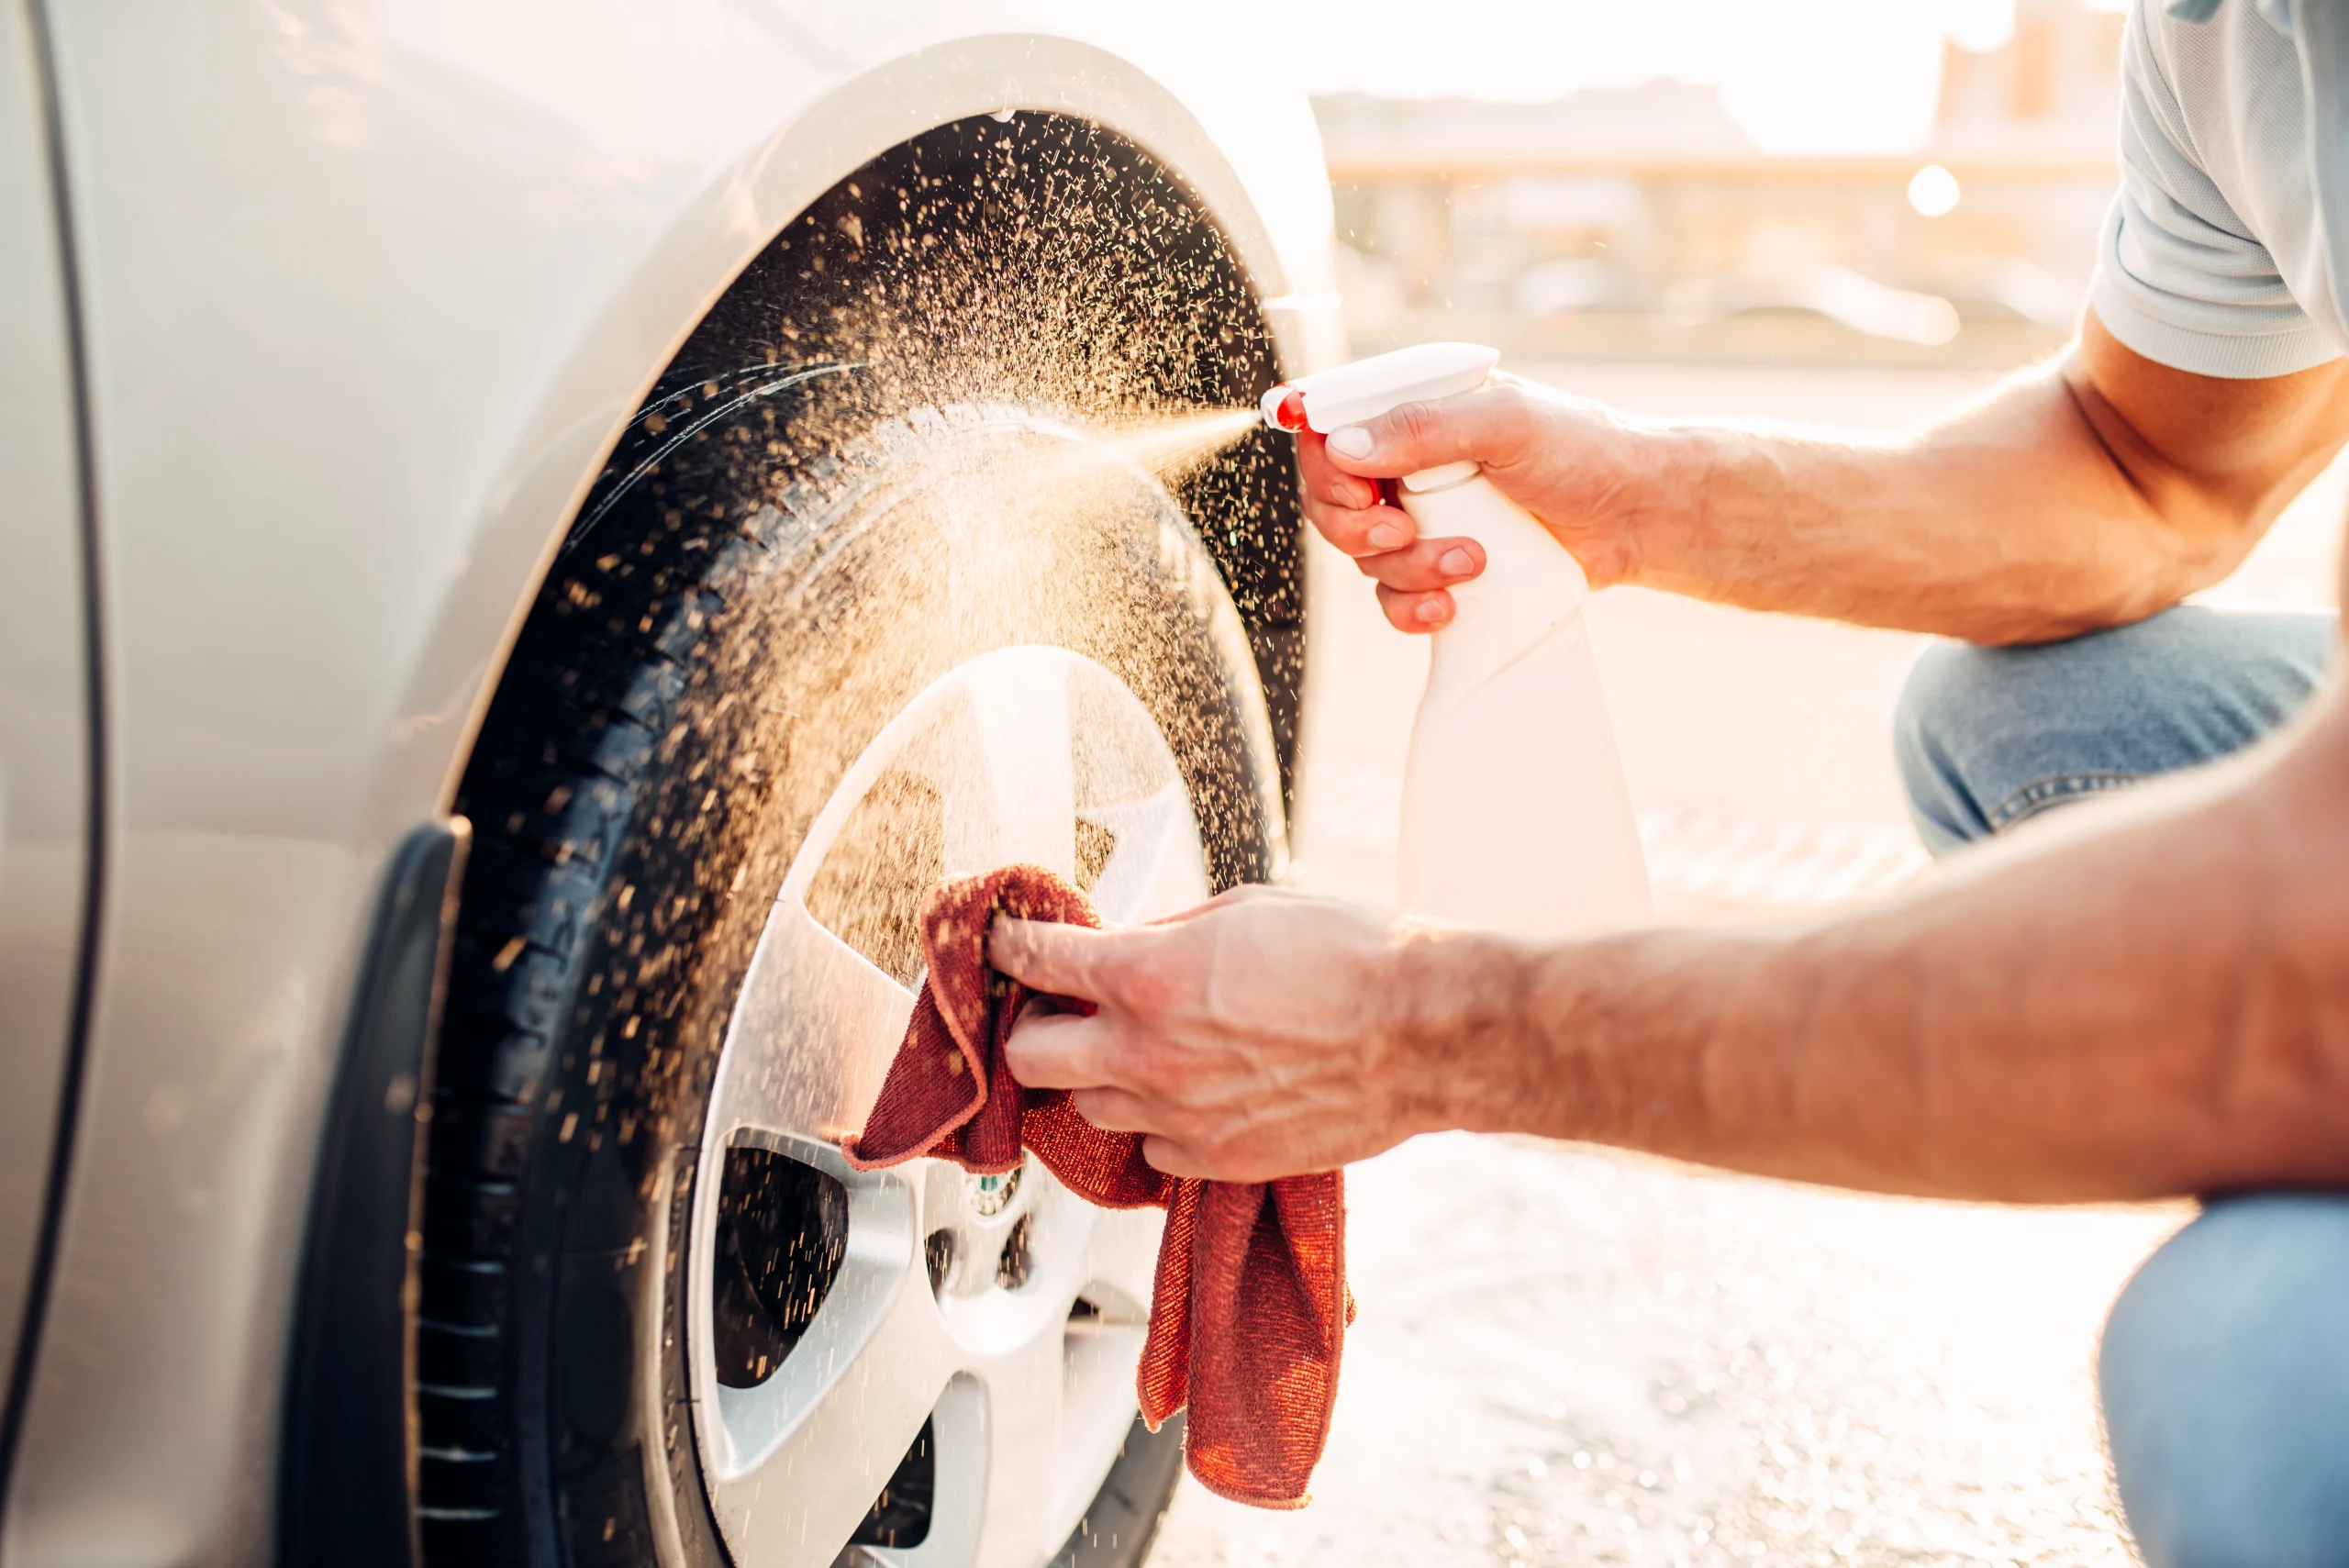 How To Clean Car Rims With Household Products?